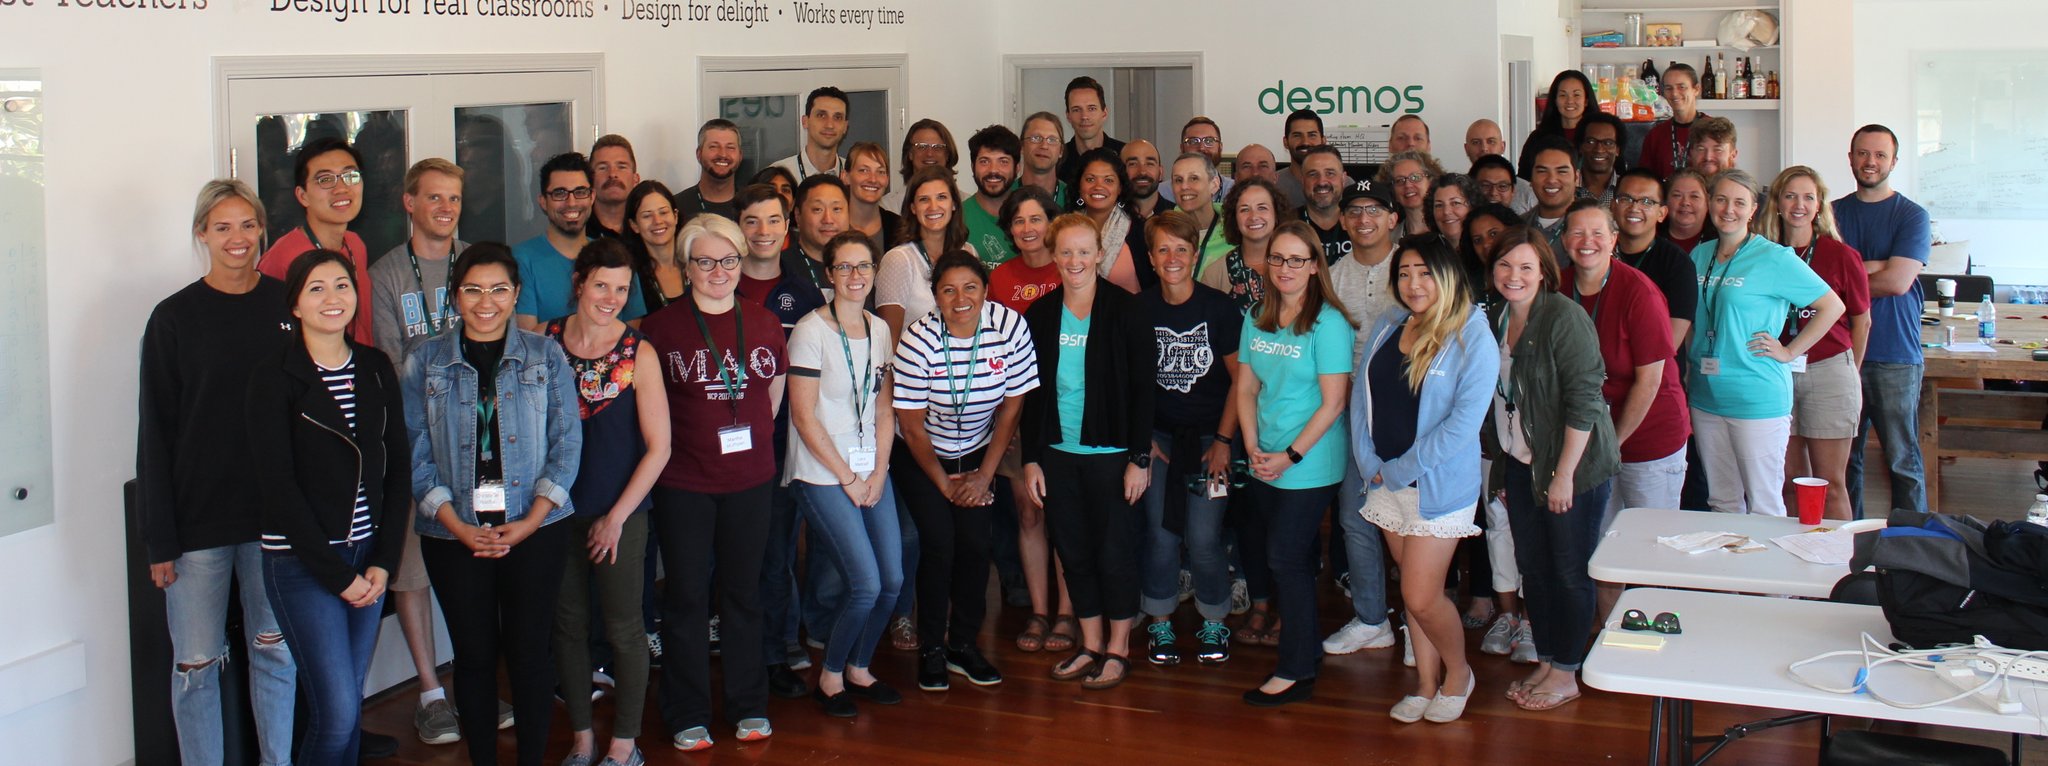 Group portrait of Desmos Fellows and staff at last year's Fellows weekend